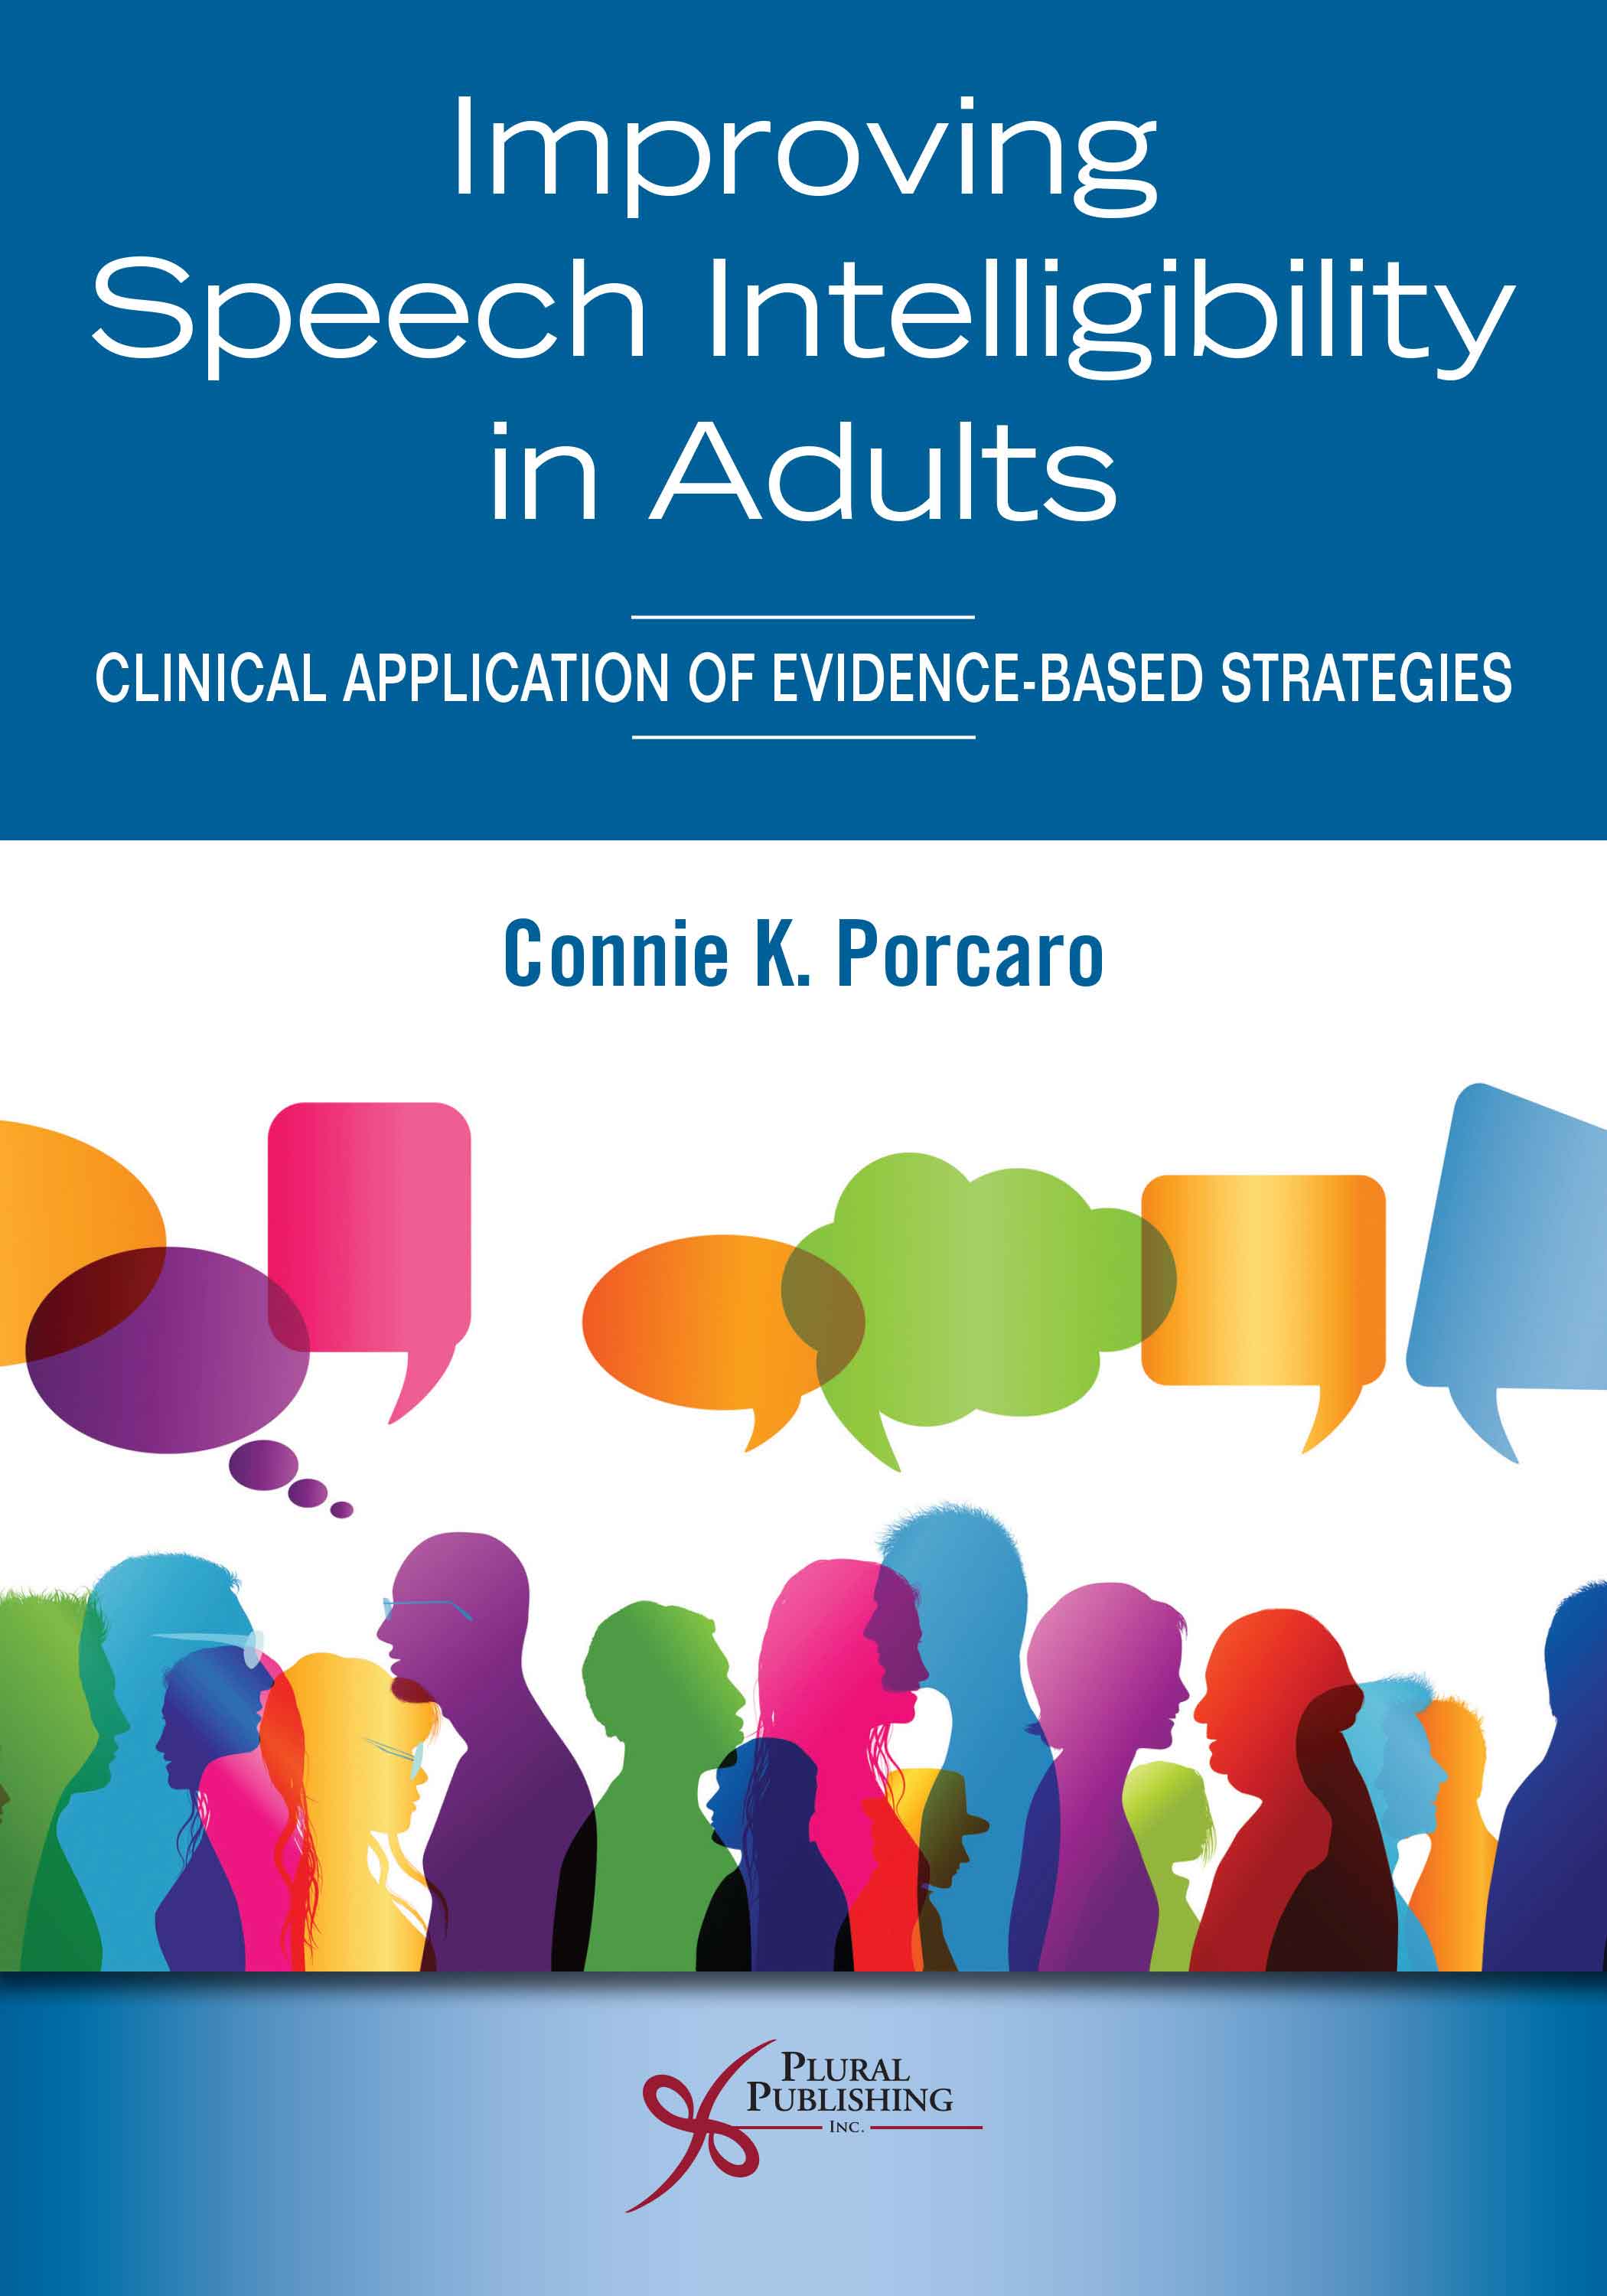 Speech Intelligibility in Adults